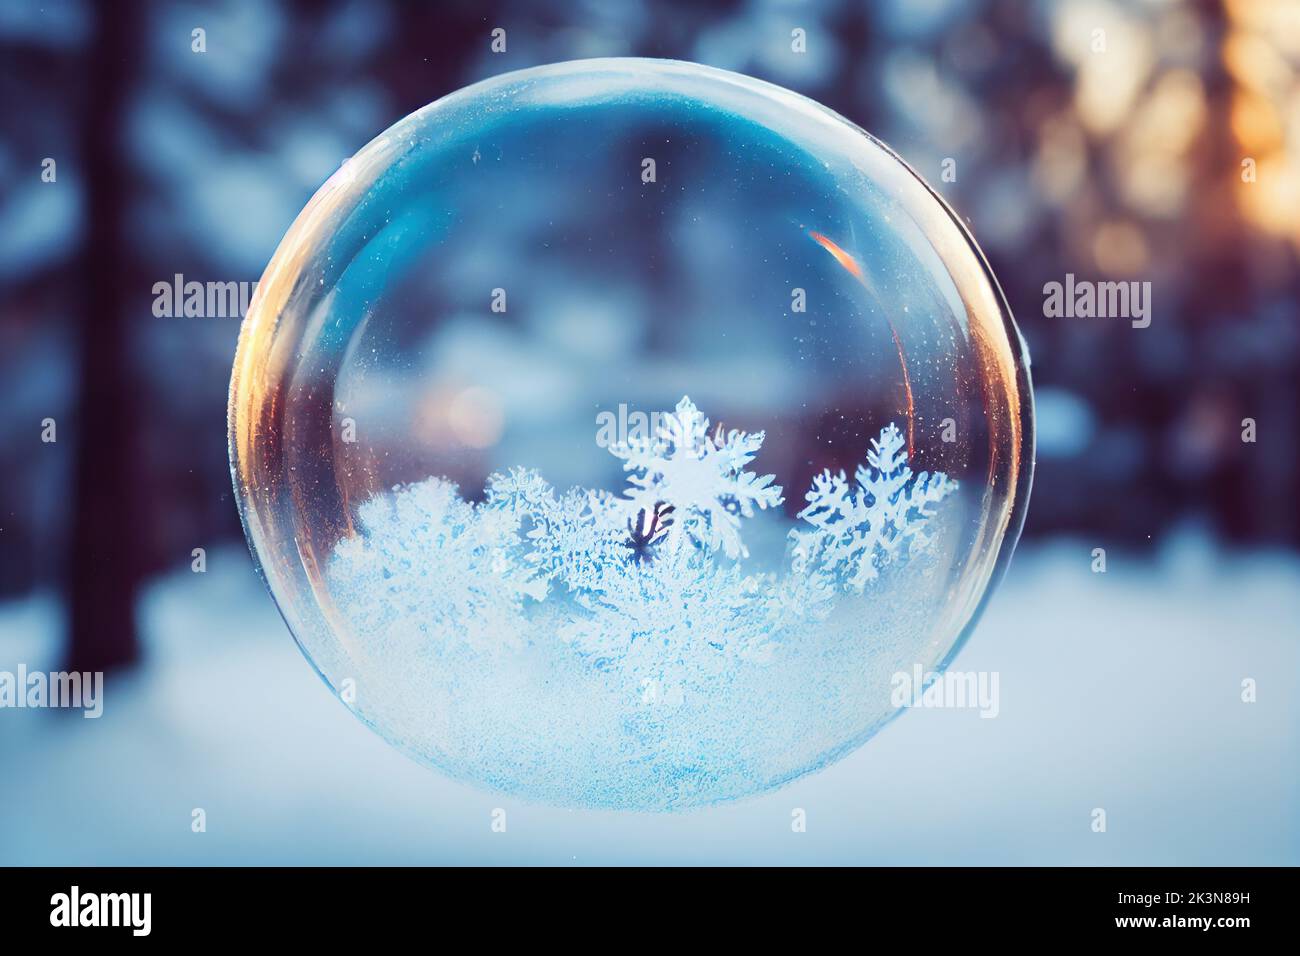 A closeup on a frozen bubble with snowflakes Stock Photo